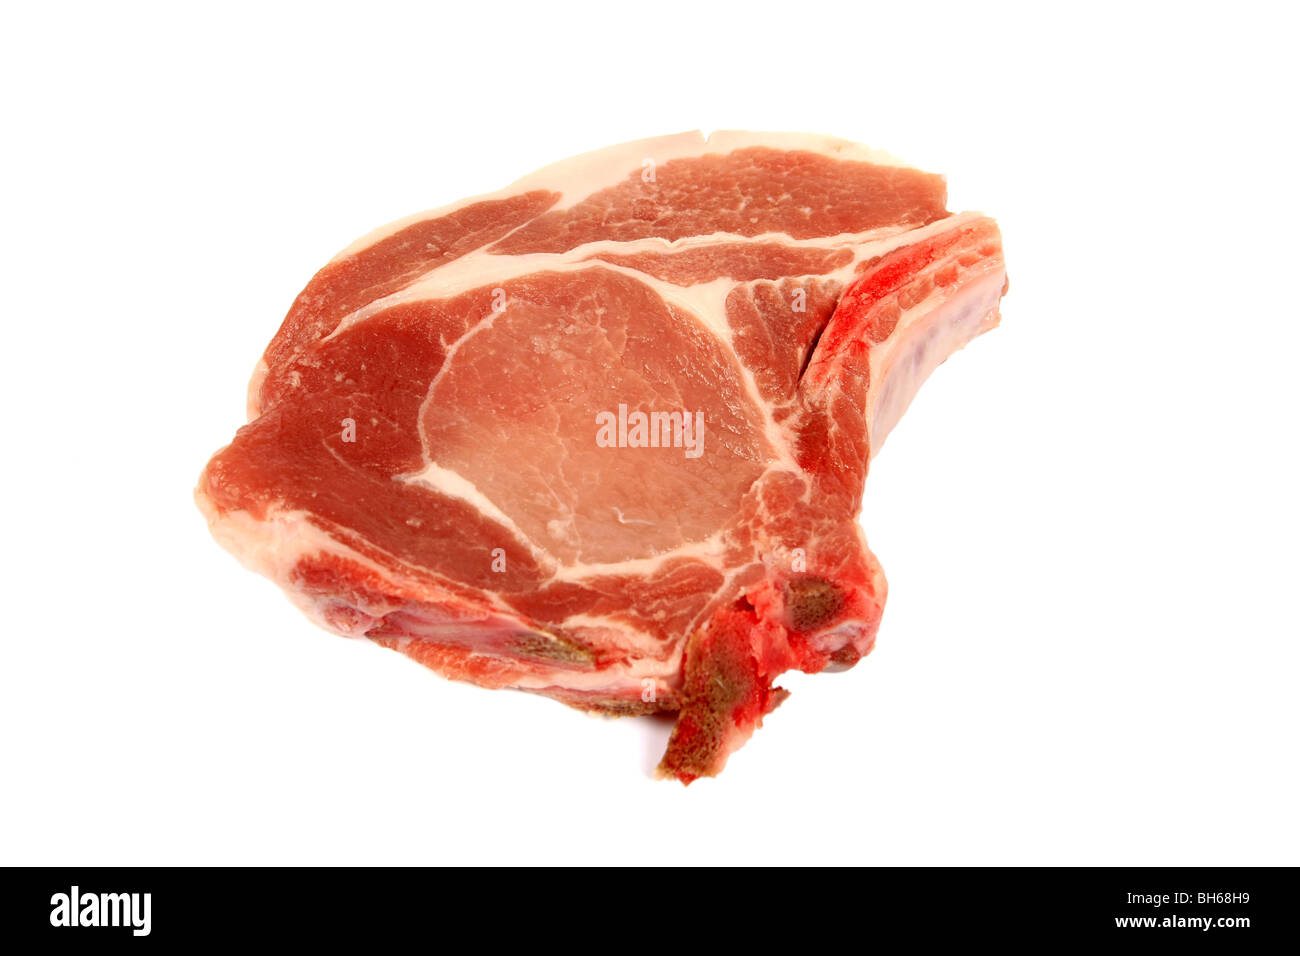 One Pork Loin chop against a white background Stock Photo